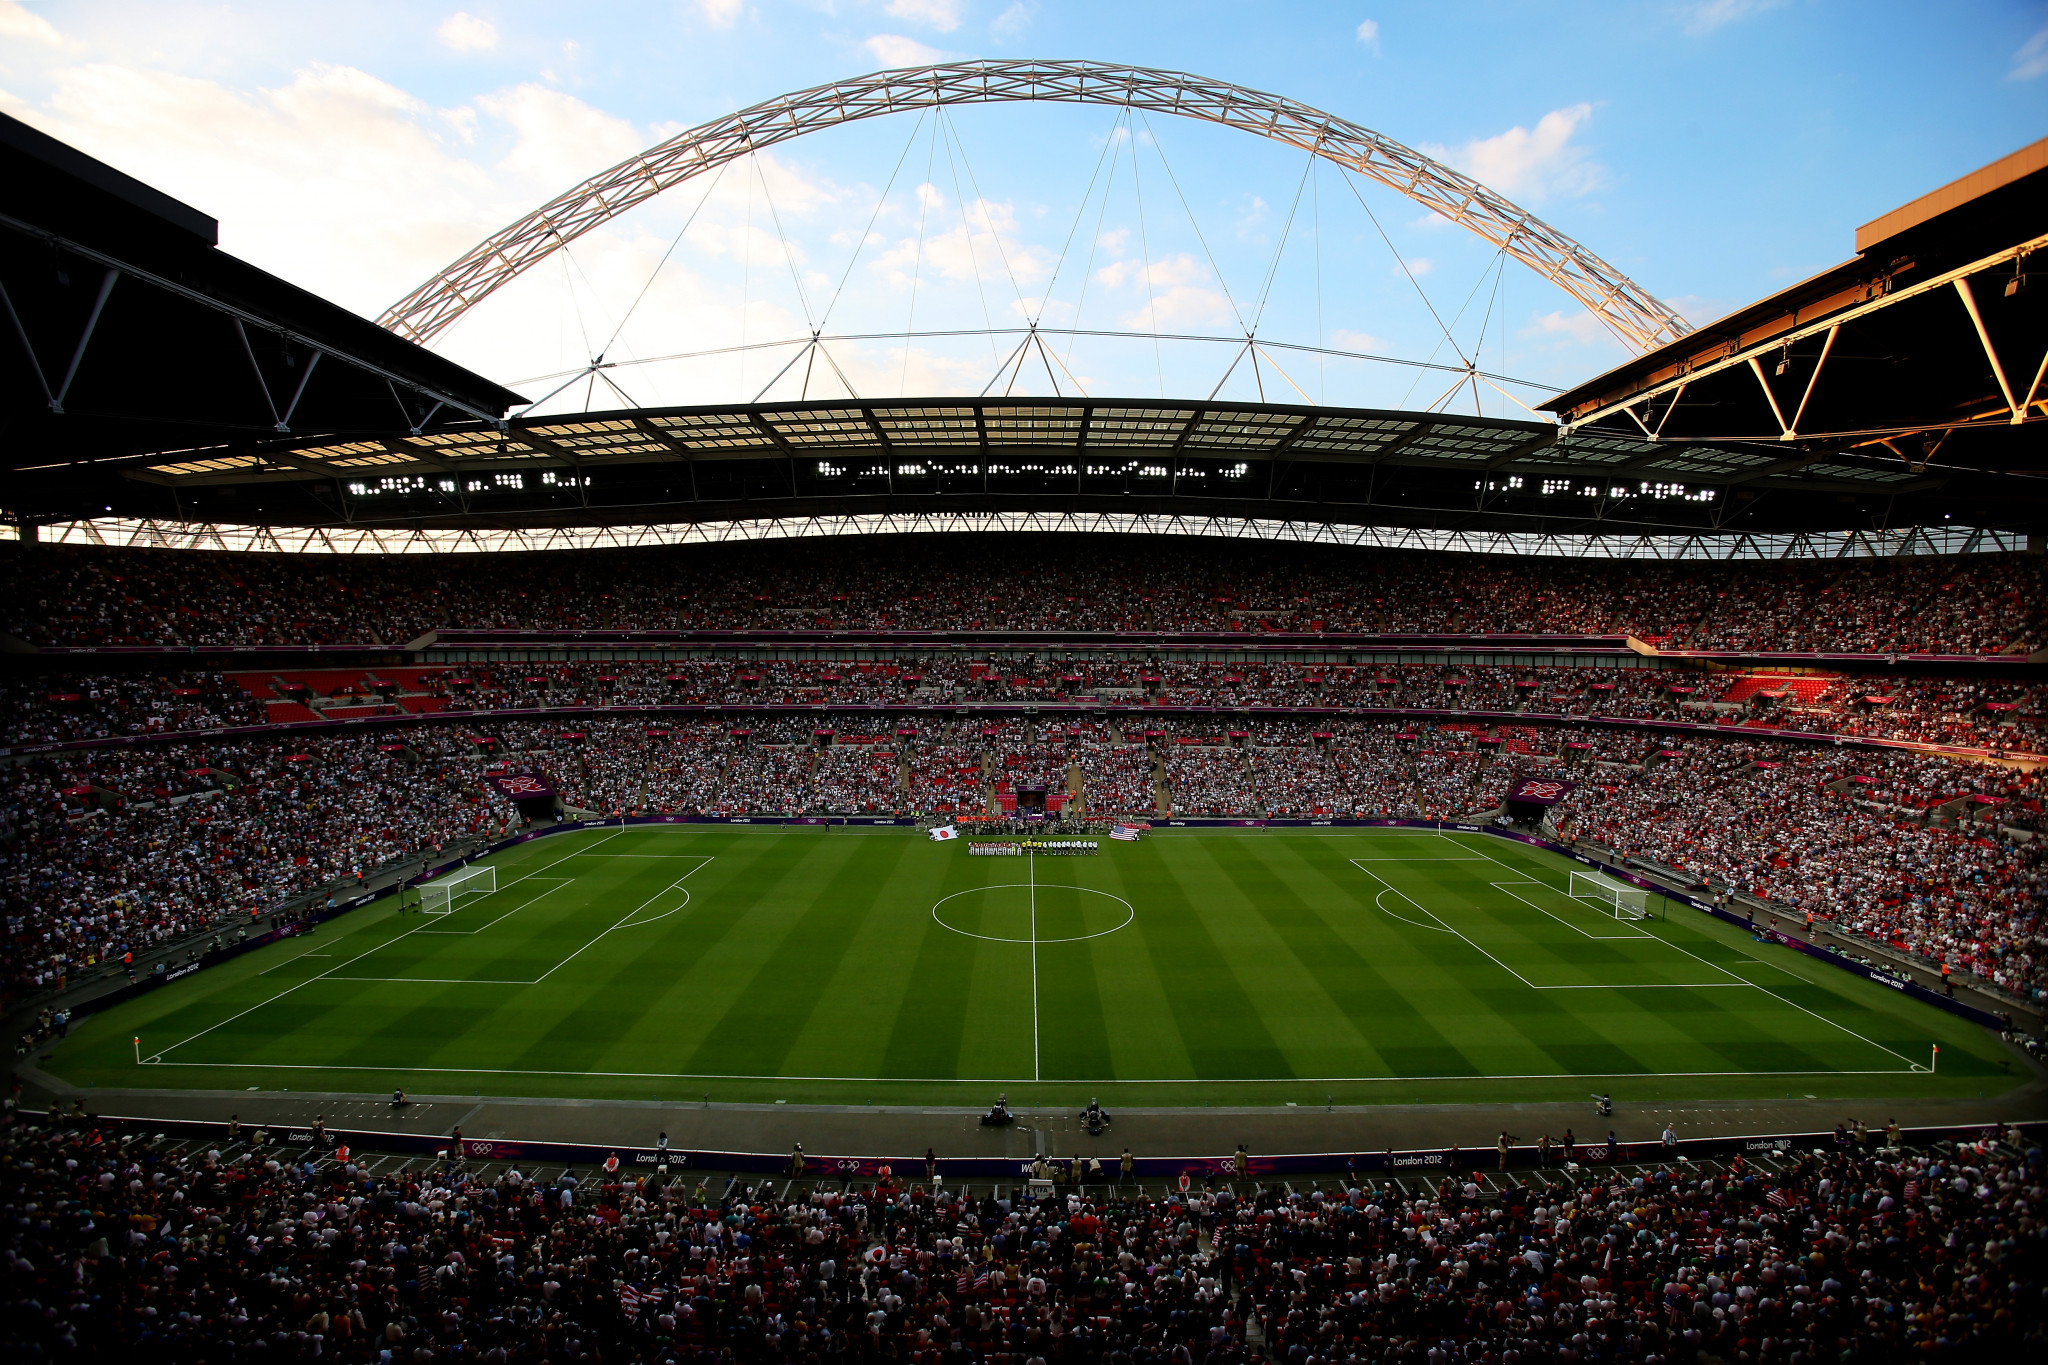 Wembley is set to have its capacity increased to over 60,000 for the final three matches of Euro 2020 ©Getty Images